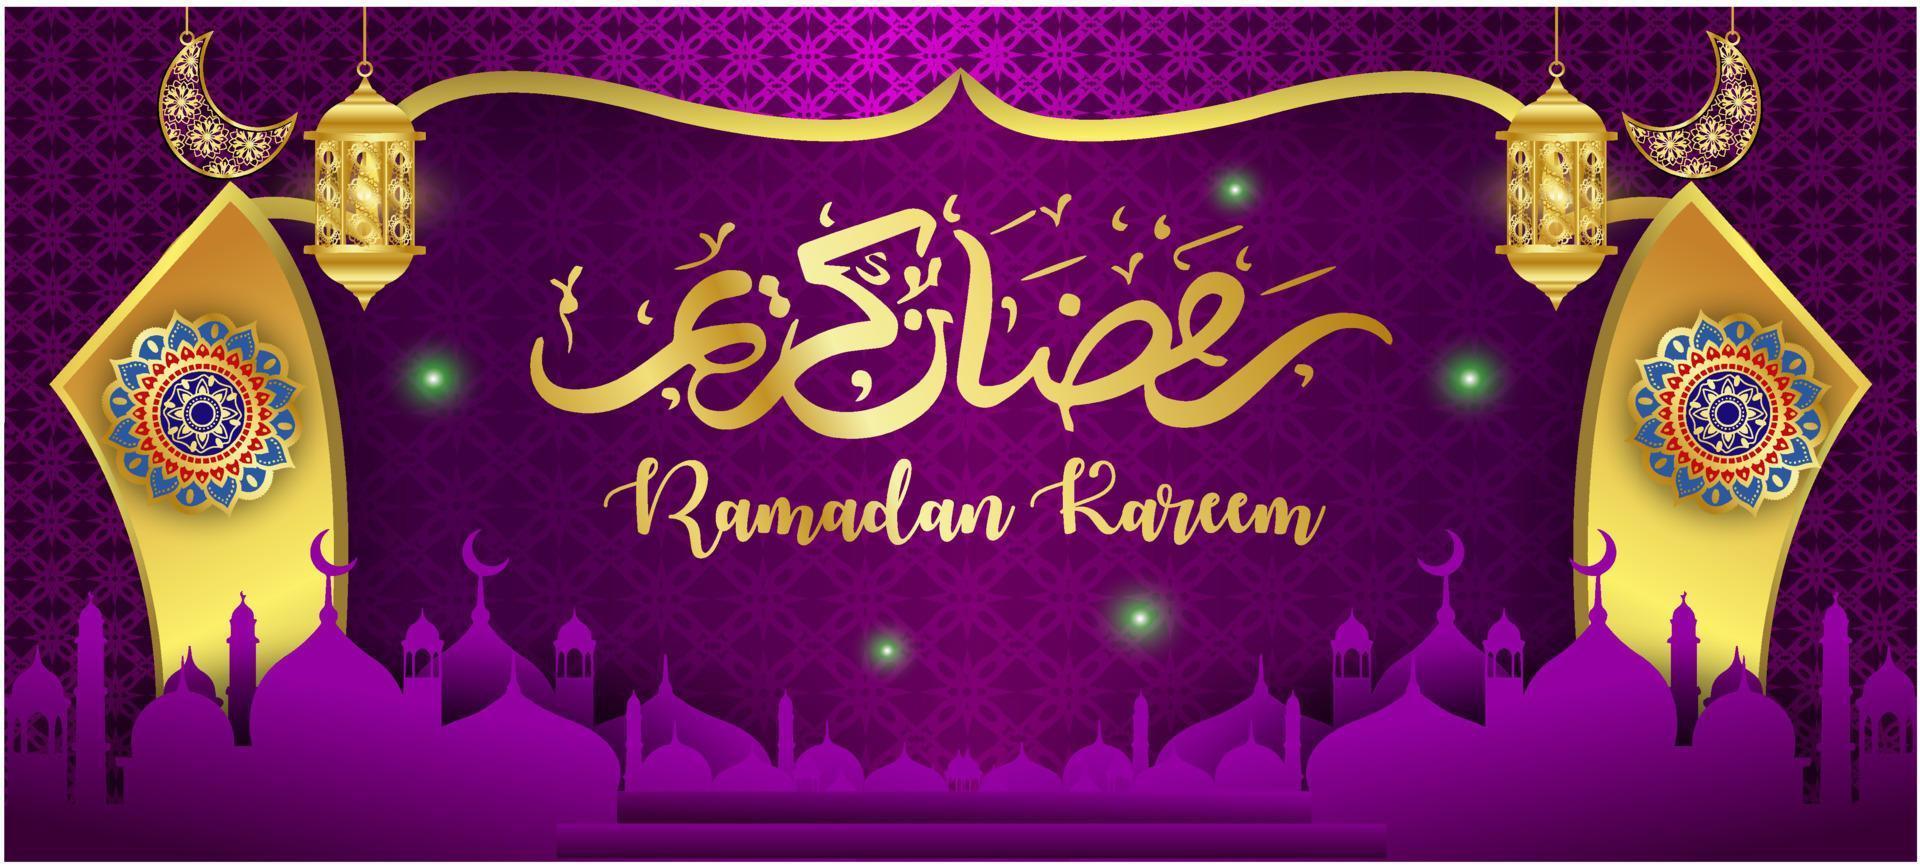 Ramadan Kareem Concept Banner 3d Gold Frame Arabic Window On Beautiful Background Beautiful Arabic Pattern Illustration Hanging Golden Crescent Moon And Paper Cut Stars At Clouds For Text Free Vector